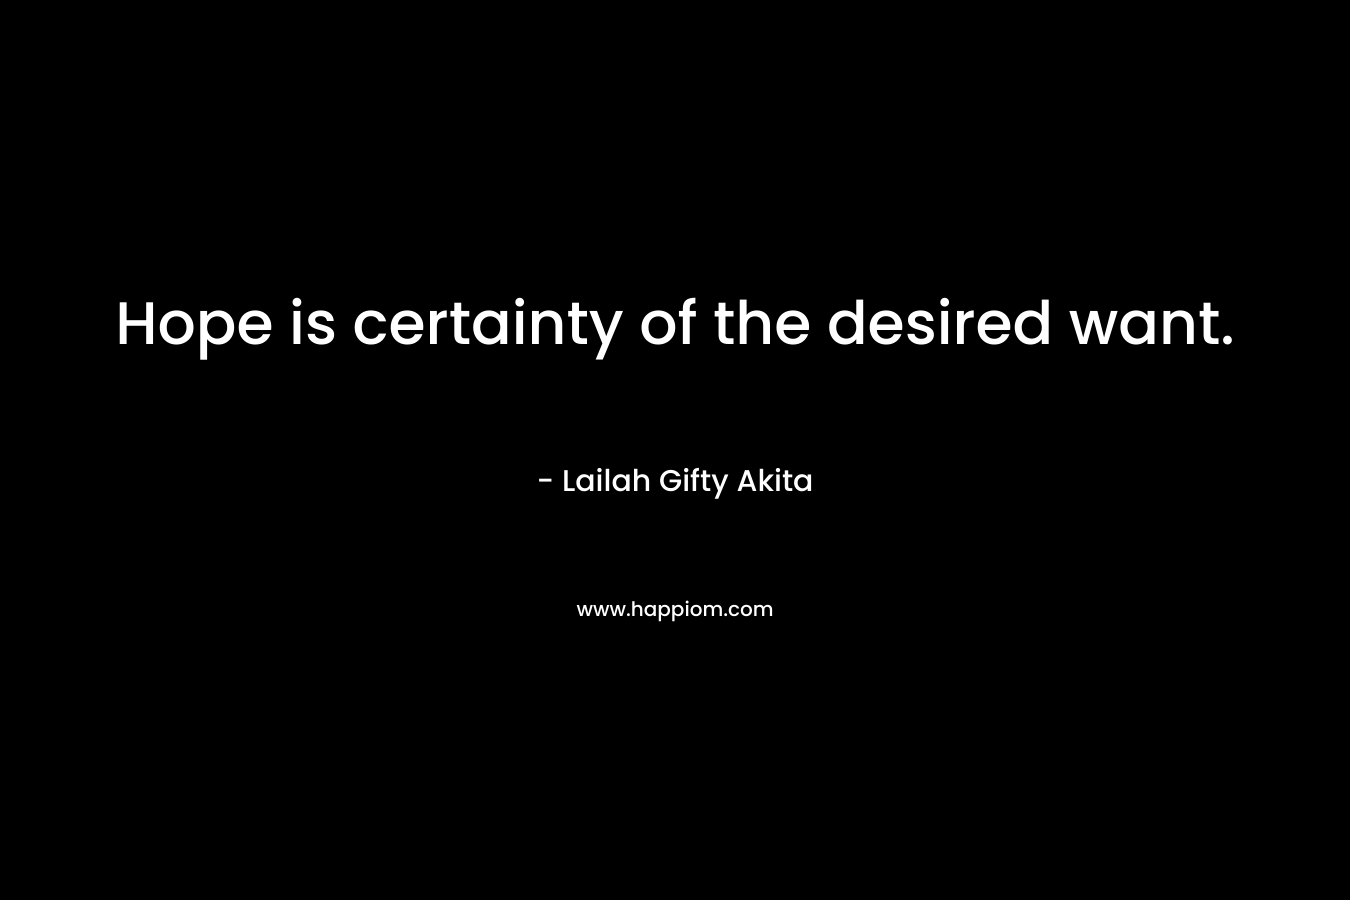 Hope is certainty of the desired want.